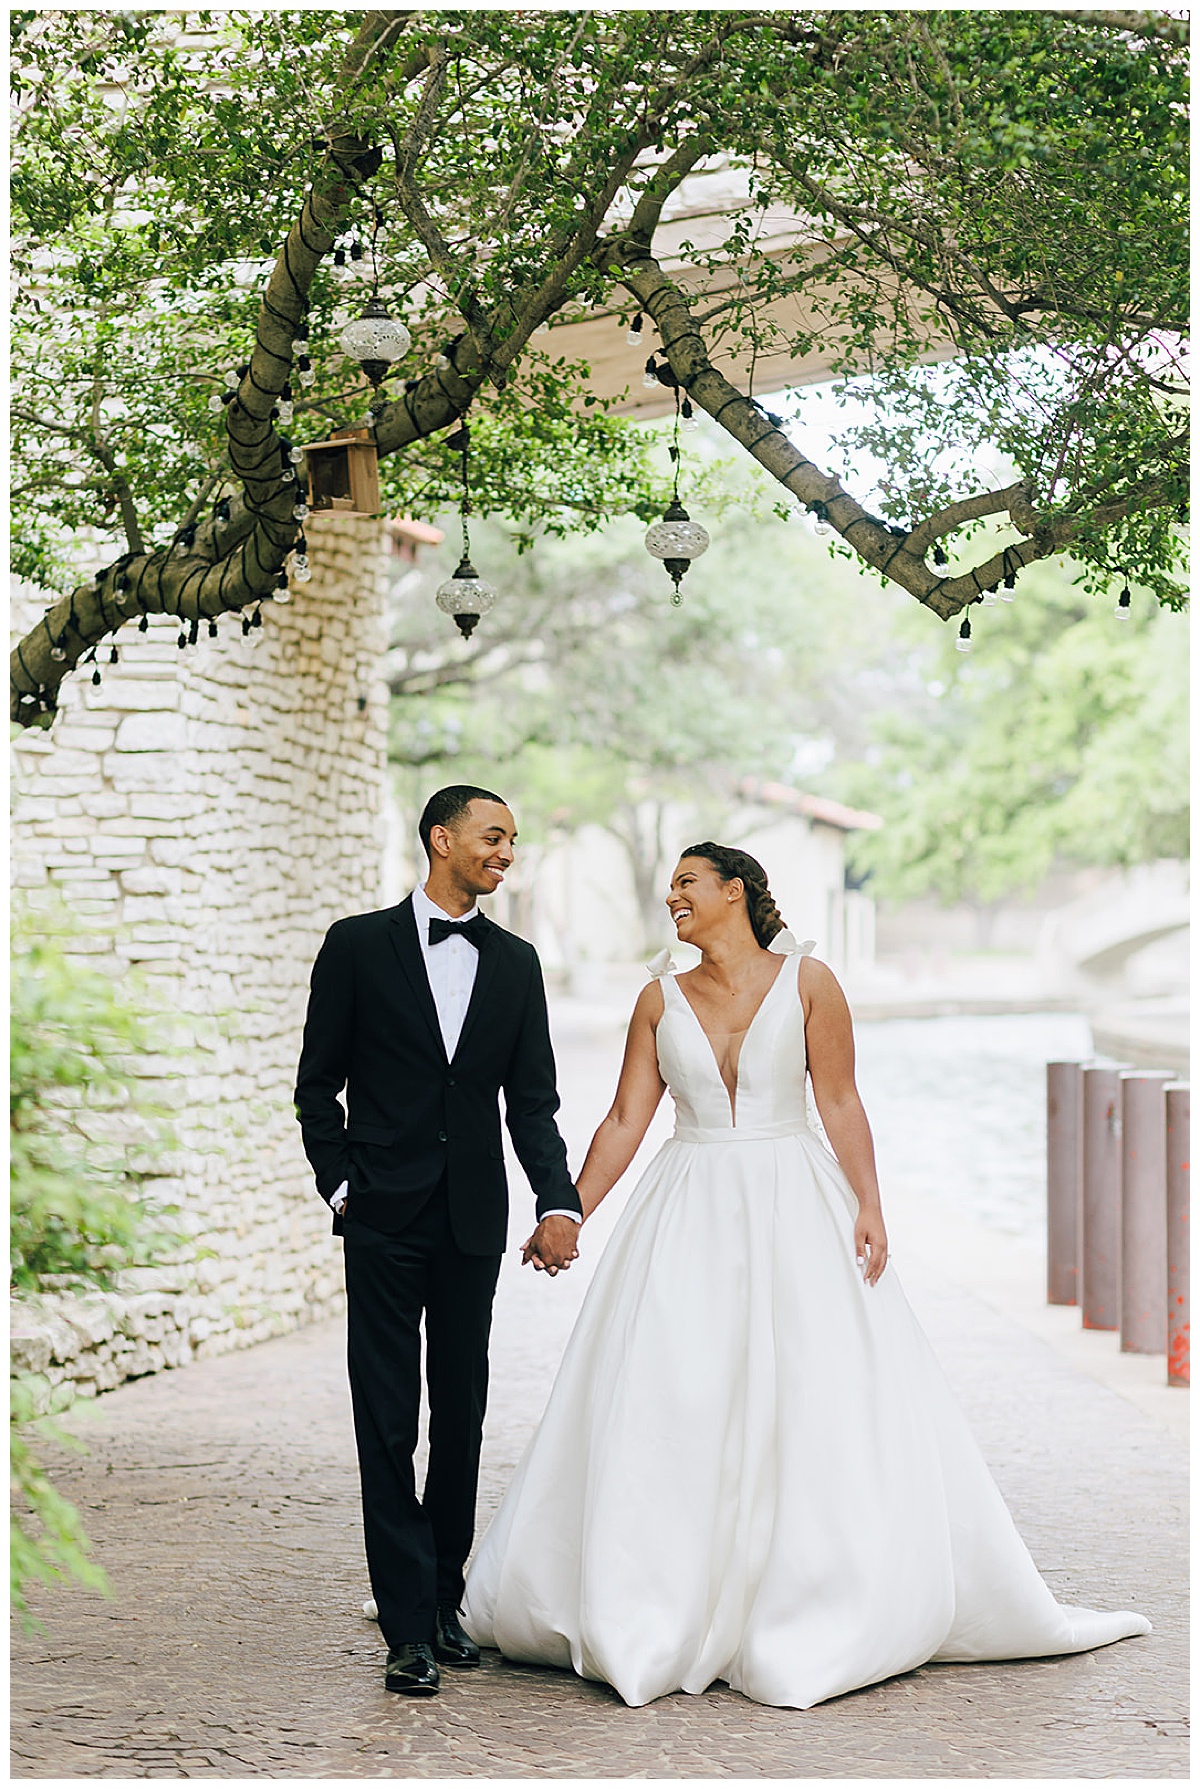 Man and woman walk hand in hand together smiling and laughing for Kayla Bouren Photography